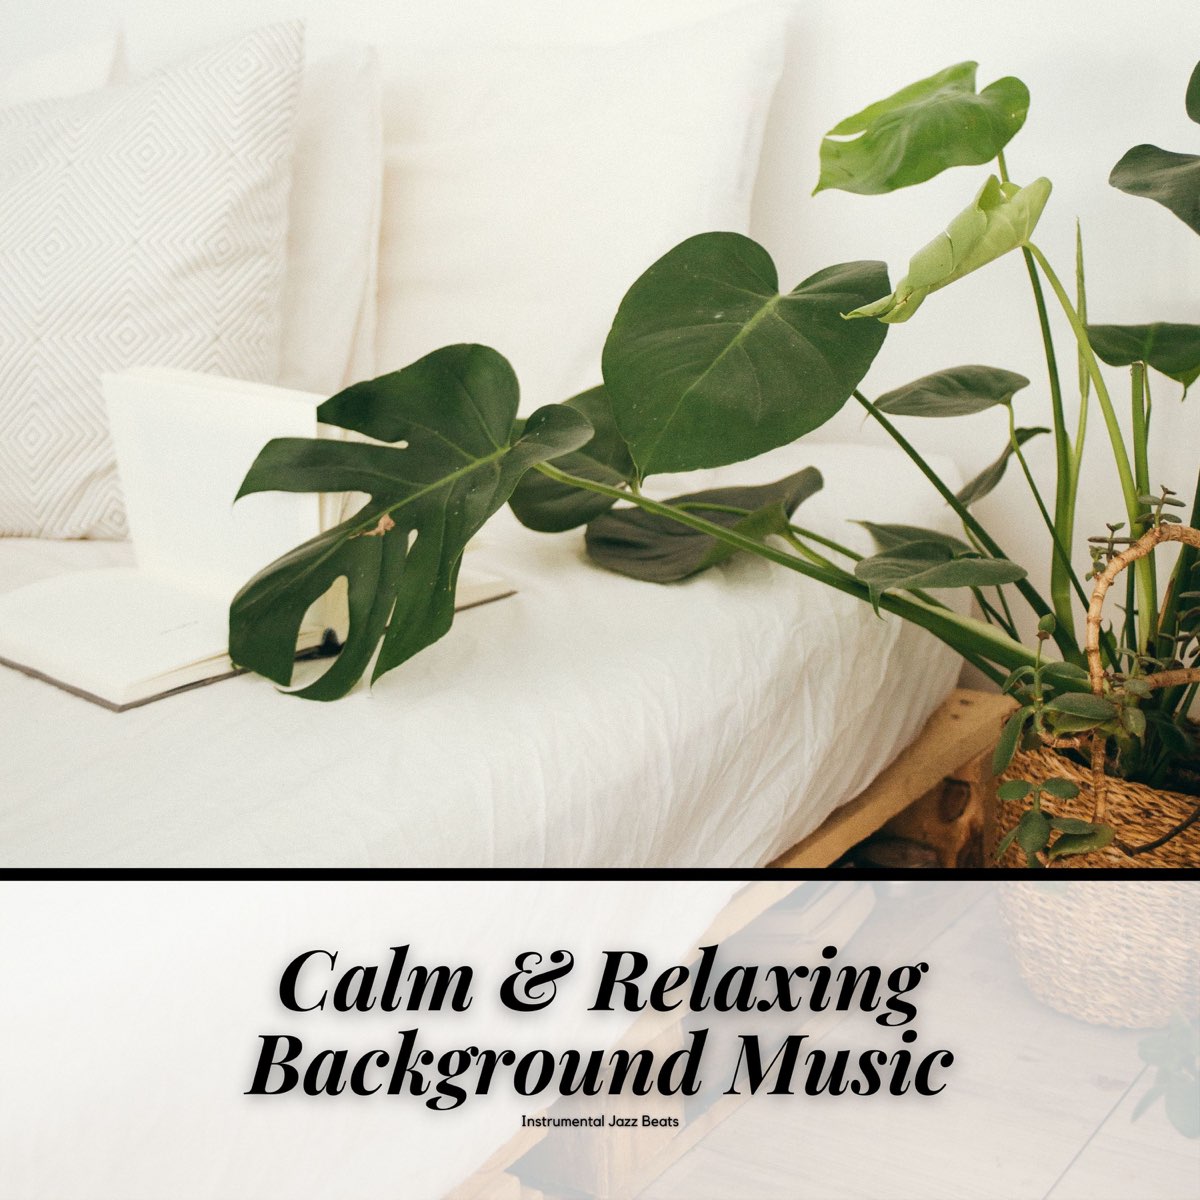 Calm & Relaxing Background Music by Jazz Instrumental Chill, Chill  Jazz-Lounge & Instrumental Jazz Beats on Apple Music